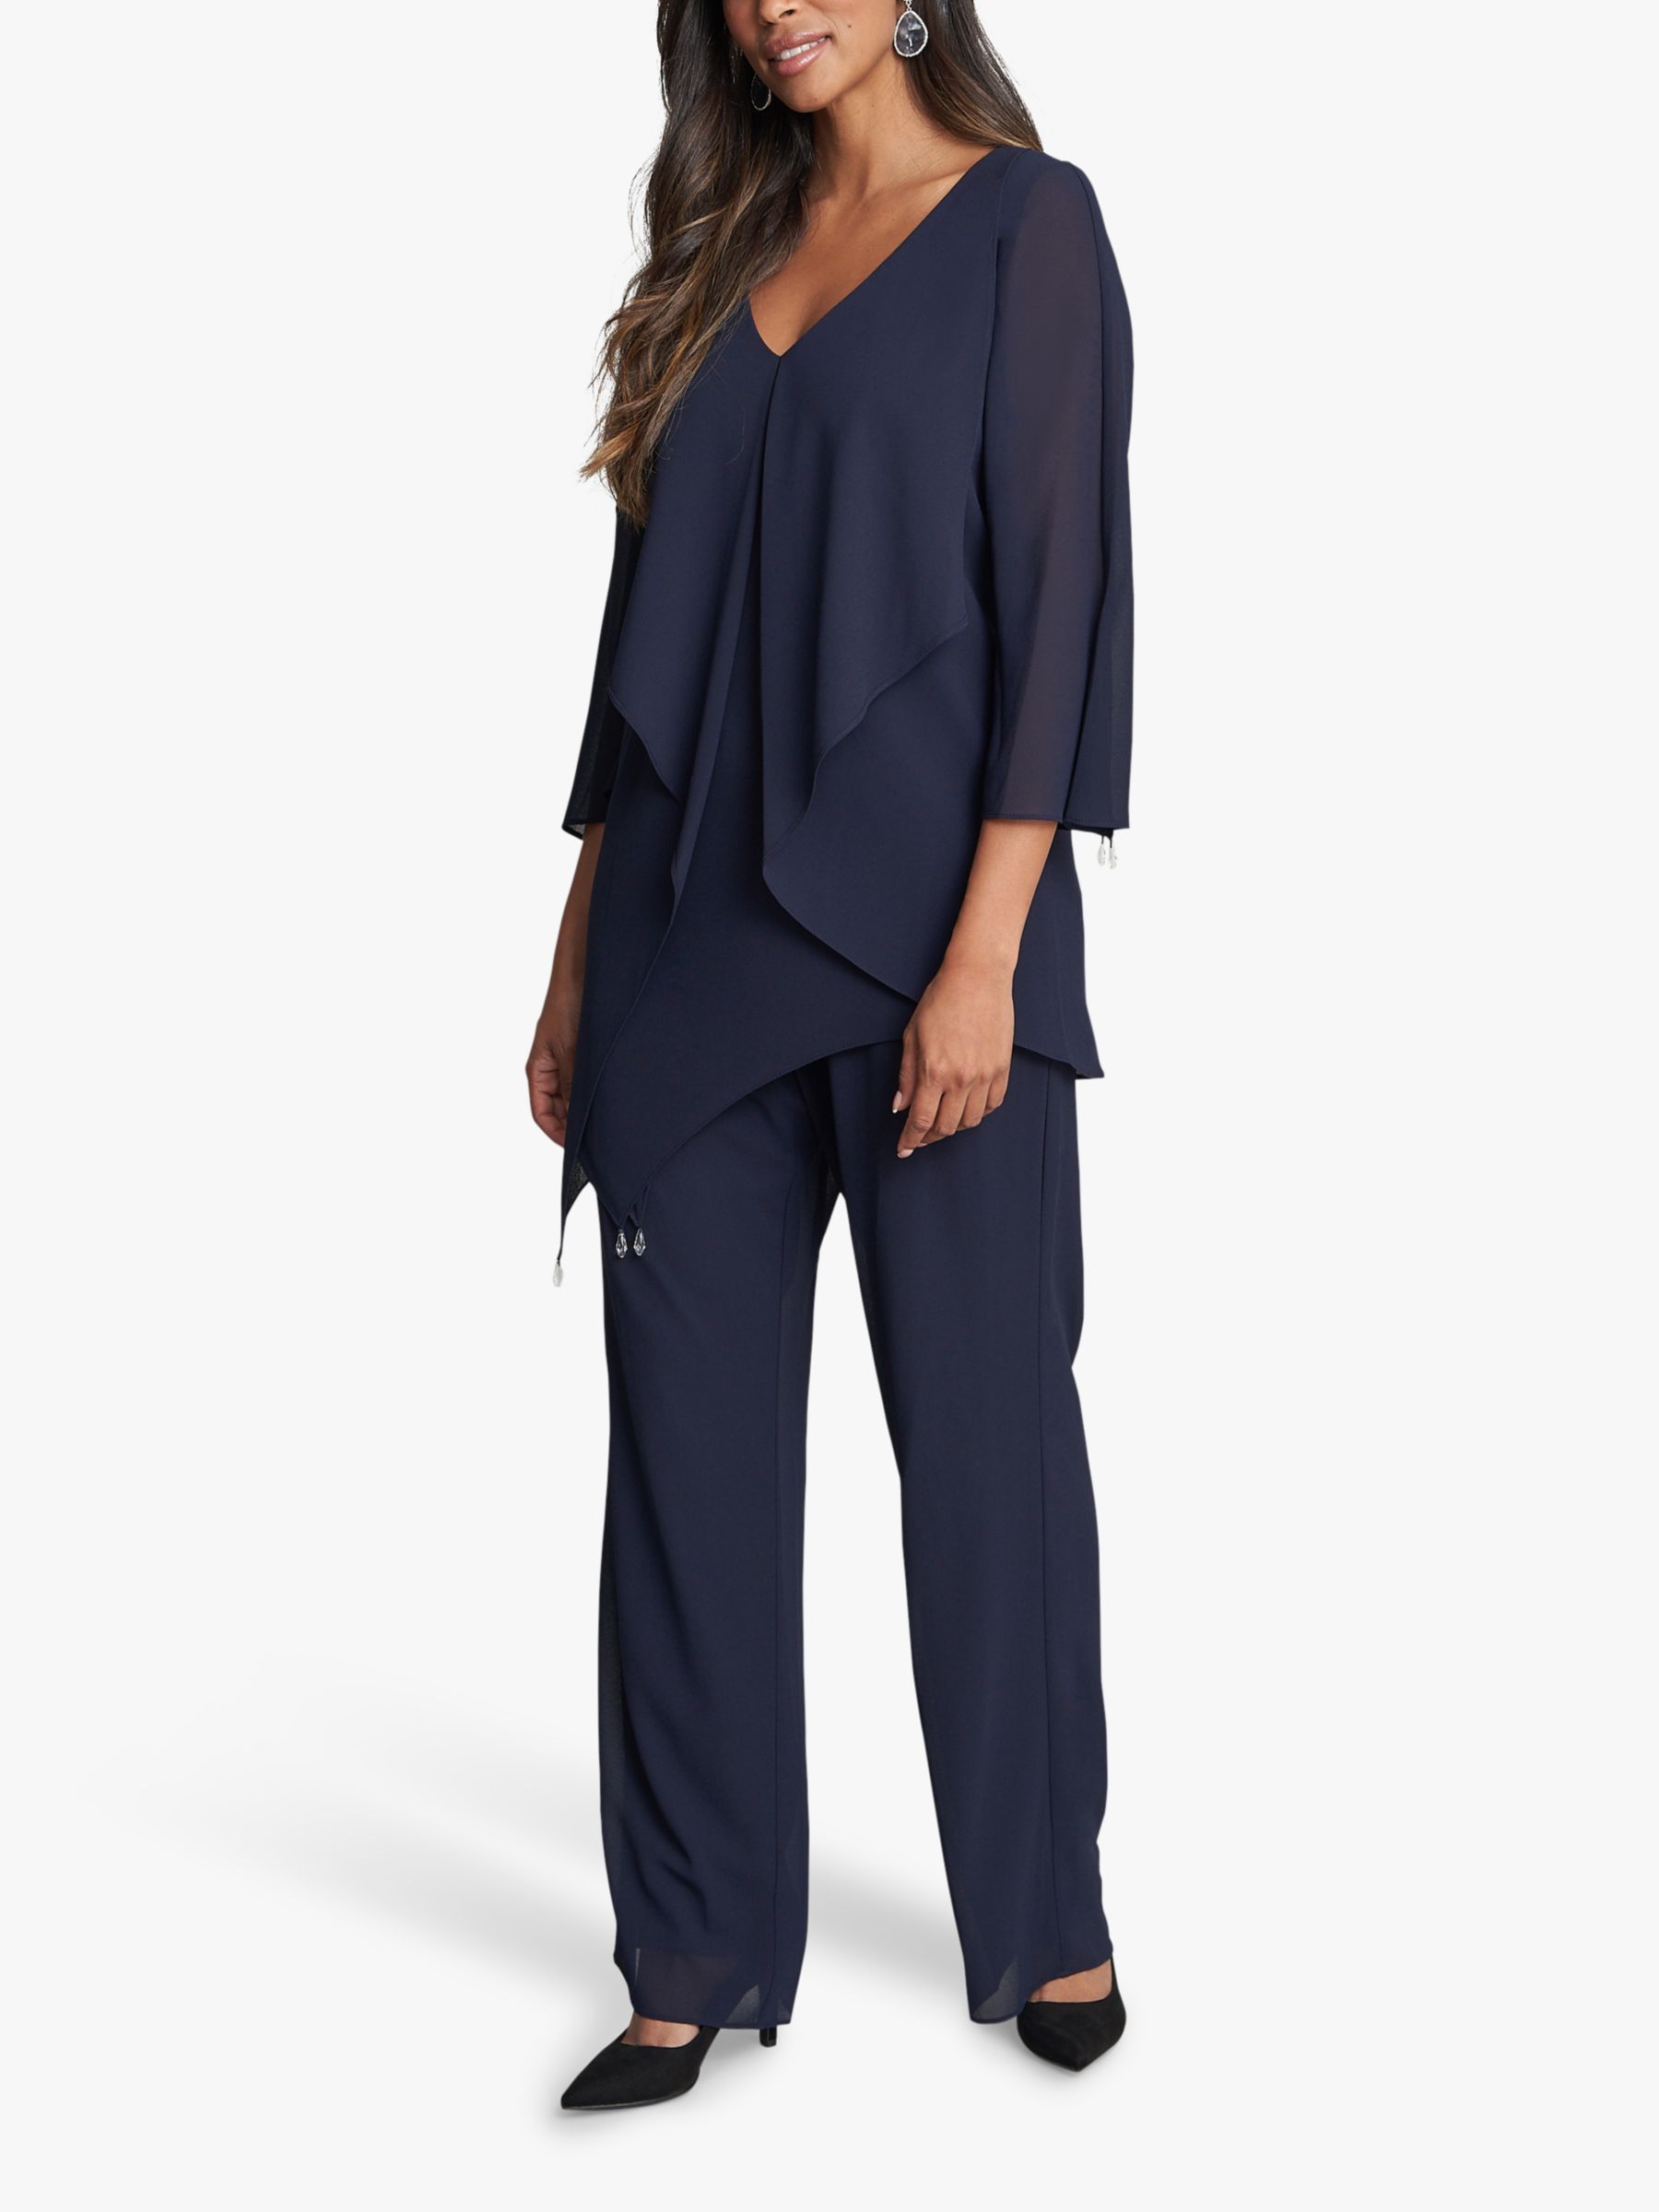 Gina Bacconi Wilma 2-Piece Suit With Asymmetric Cascade Ruffle Blouse & Wide Leg Trousers, Navy, 10